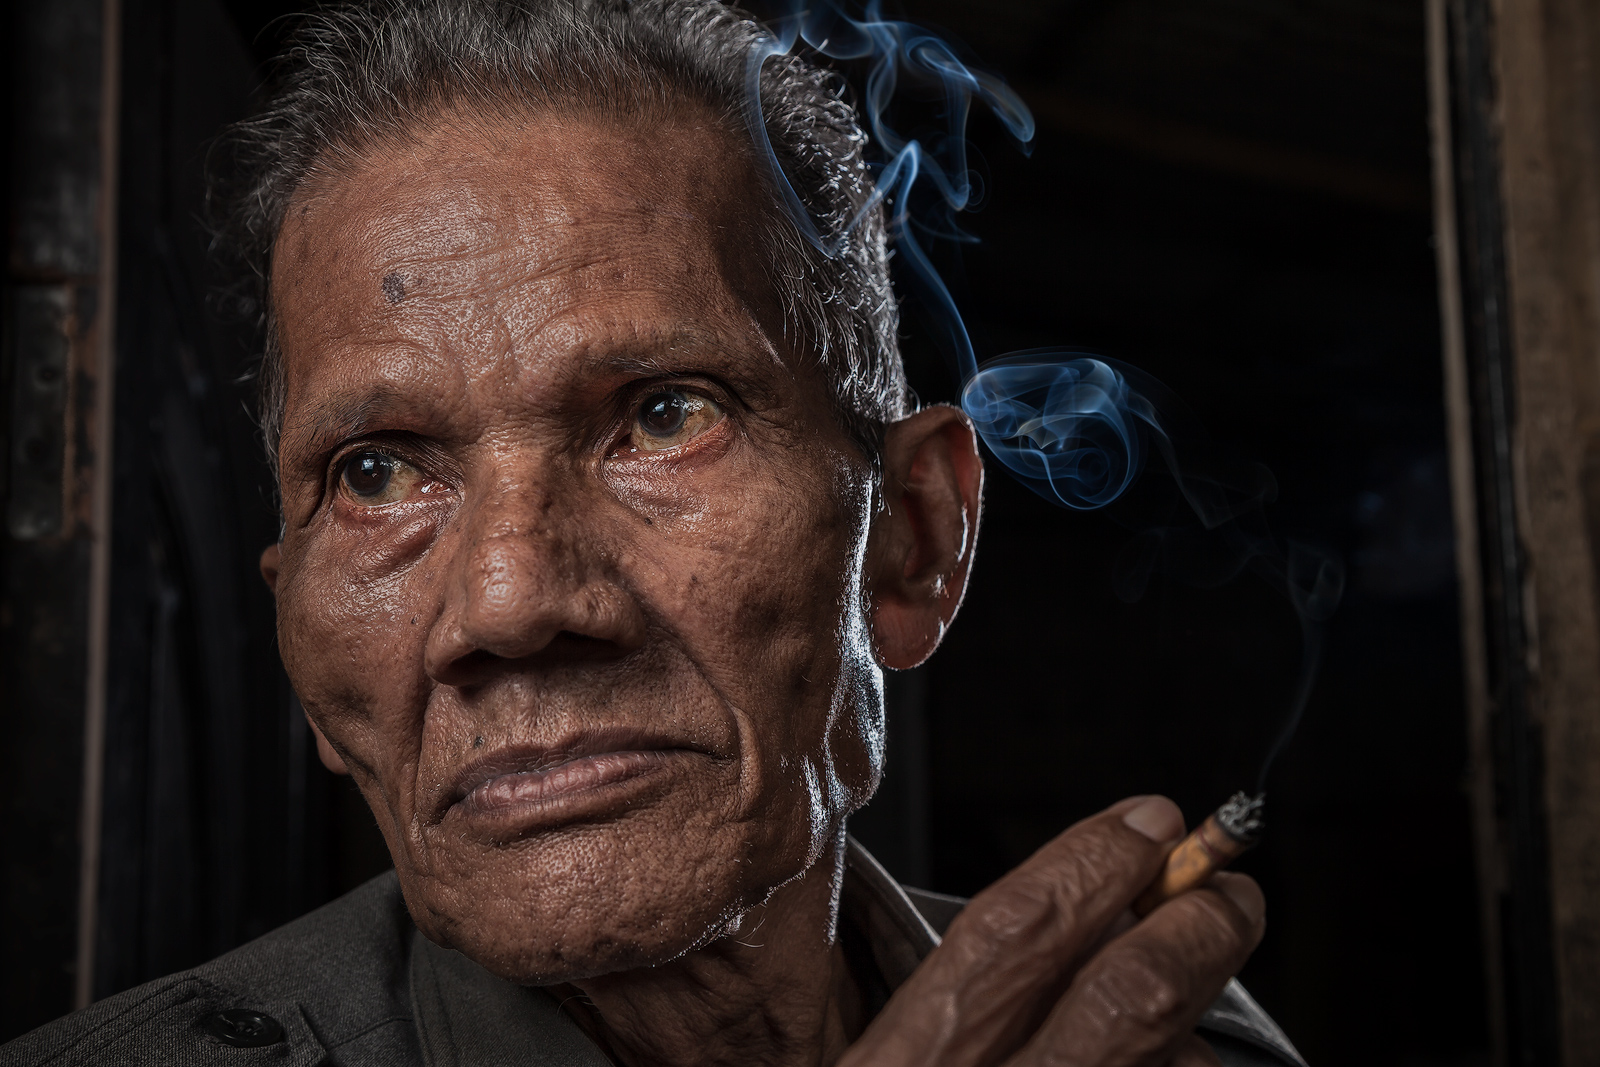 Close-up portrait of Indonesian man smoking in the doorway to his home